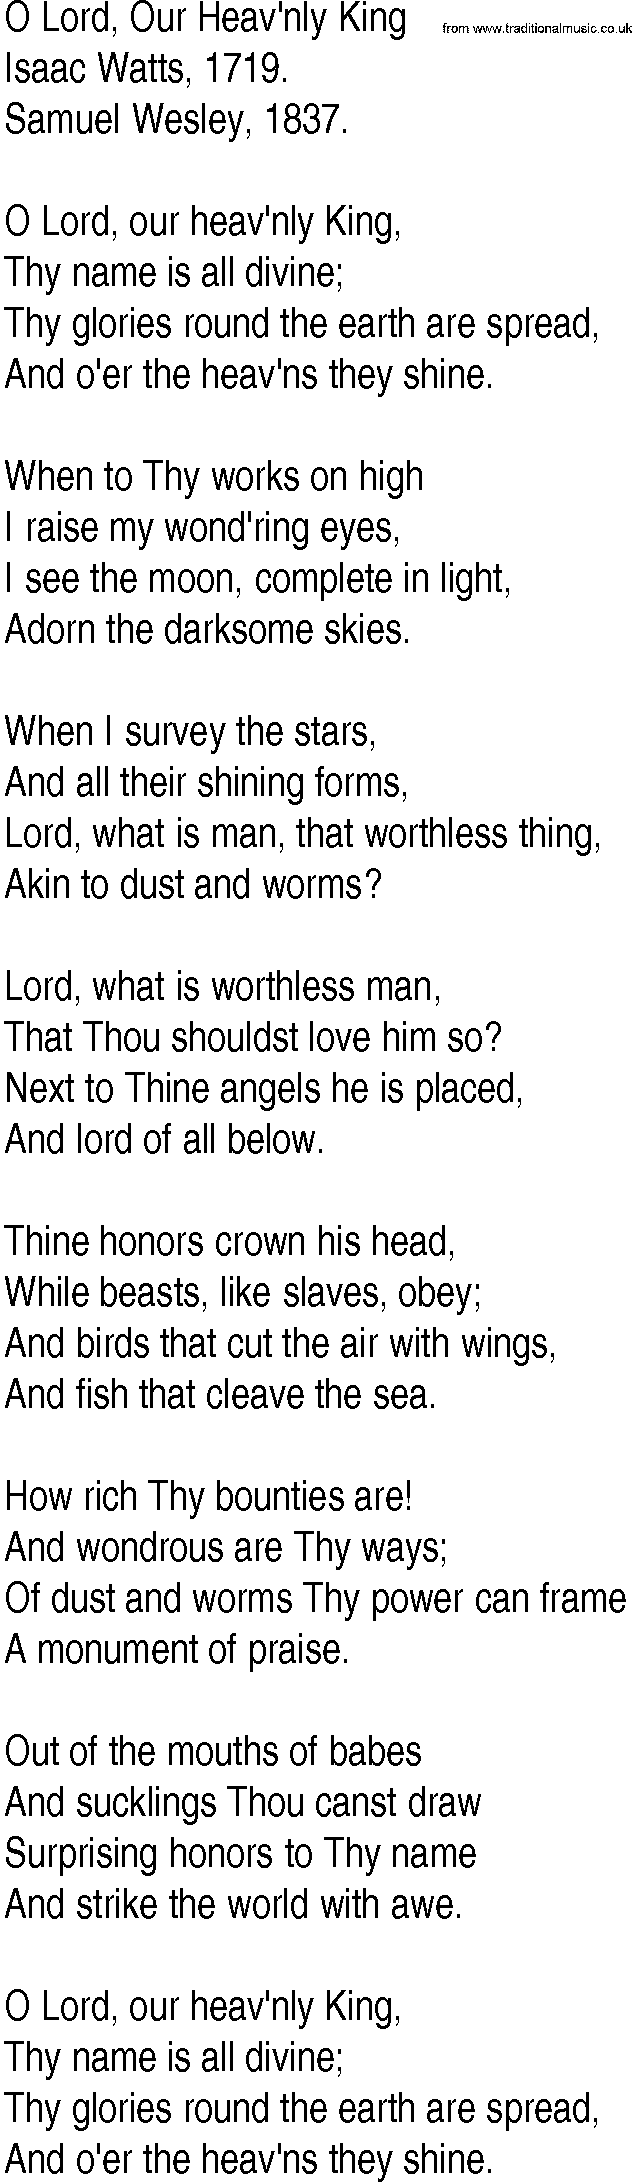 Hymn and Gospel Song: O Lord, Our Heav'nly King by Isaac Watts lyrics